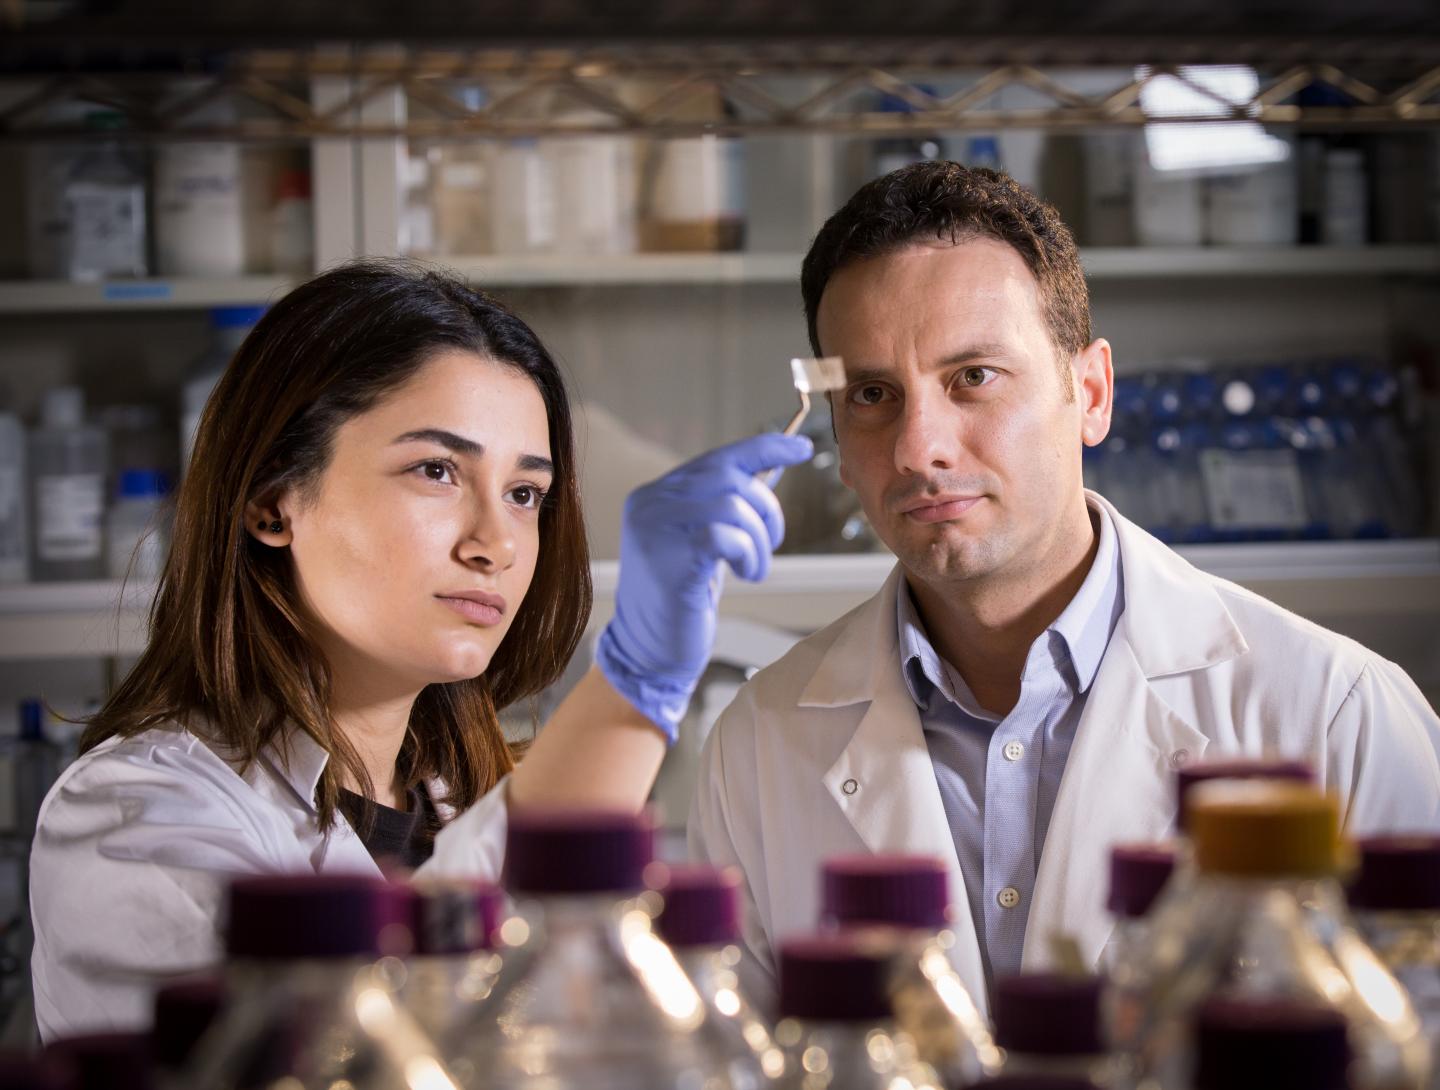 Researchers Hanie Yousefi and Thid Didar examine a transparent patch, which can be used in packaging to detect pathogens on food.